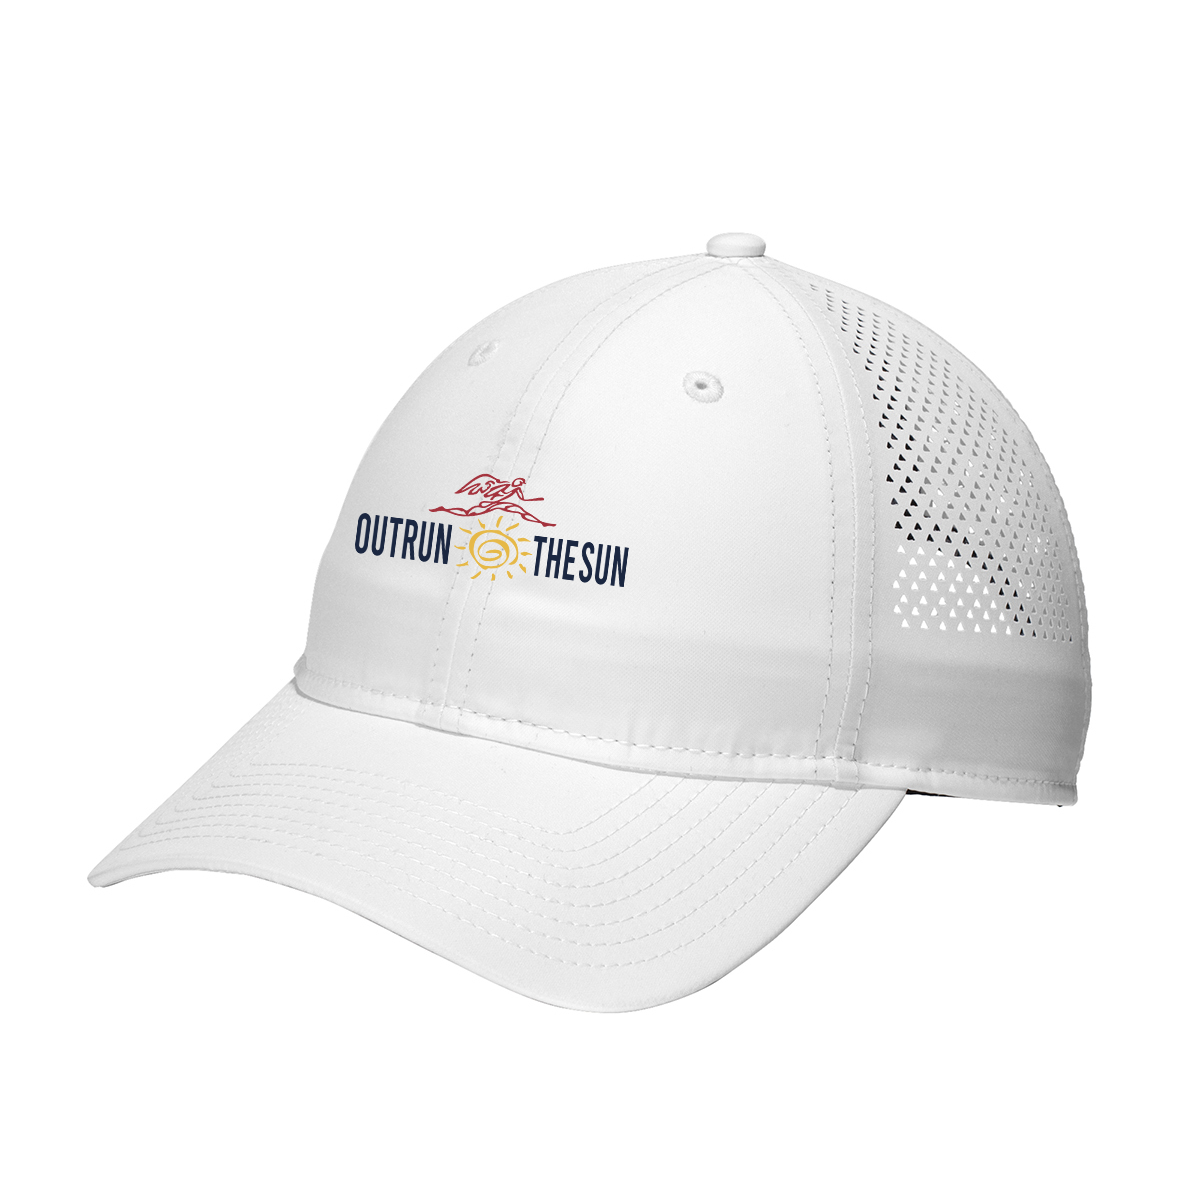 Outrun the Sun New Era® Perforated Performance Cap (UPF 50+)